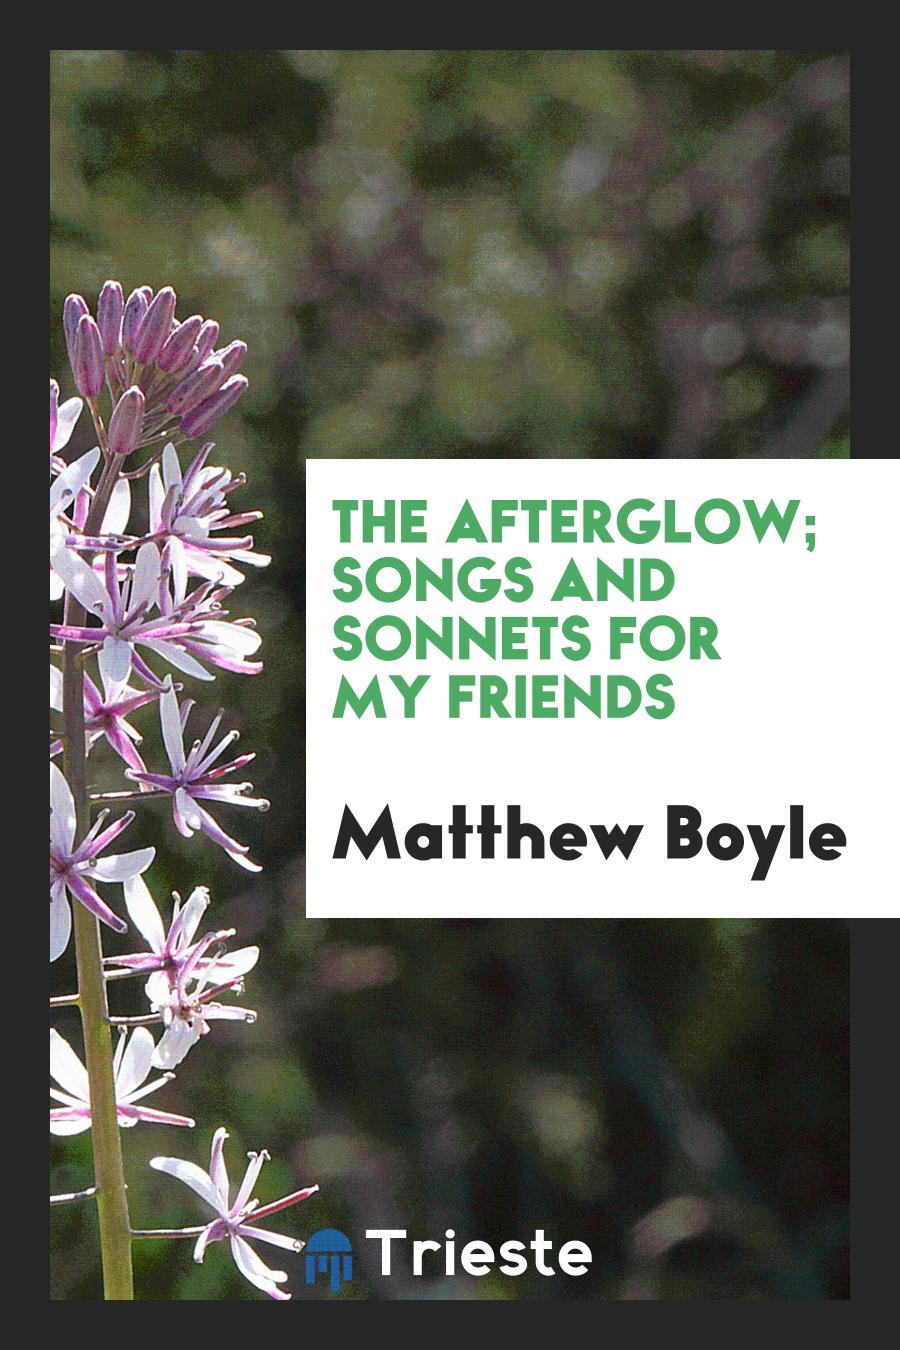 The afterglow; songs and sonnets for my friends